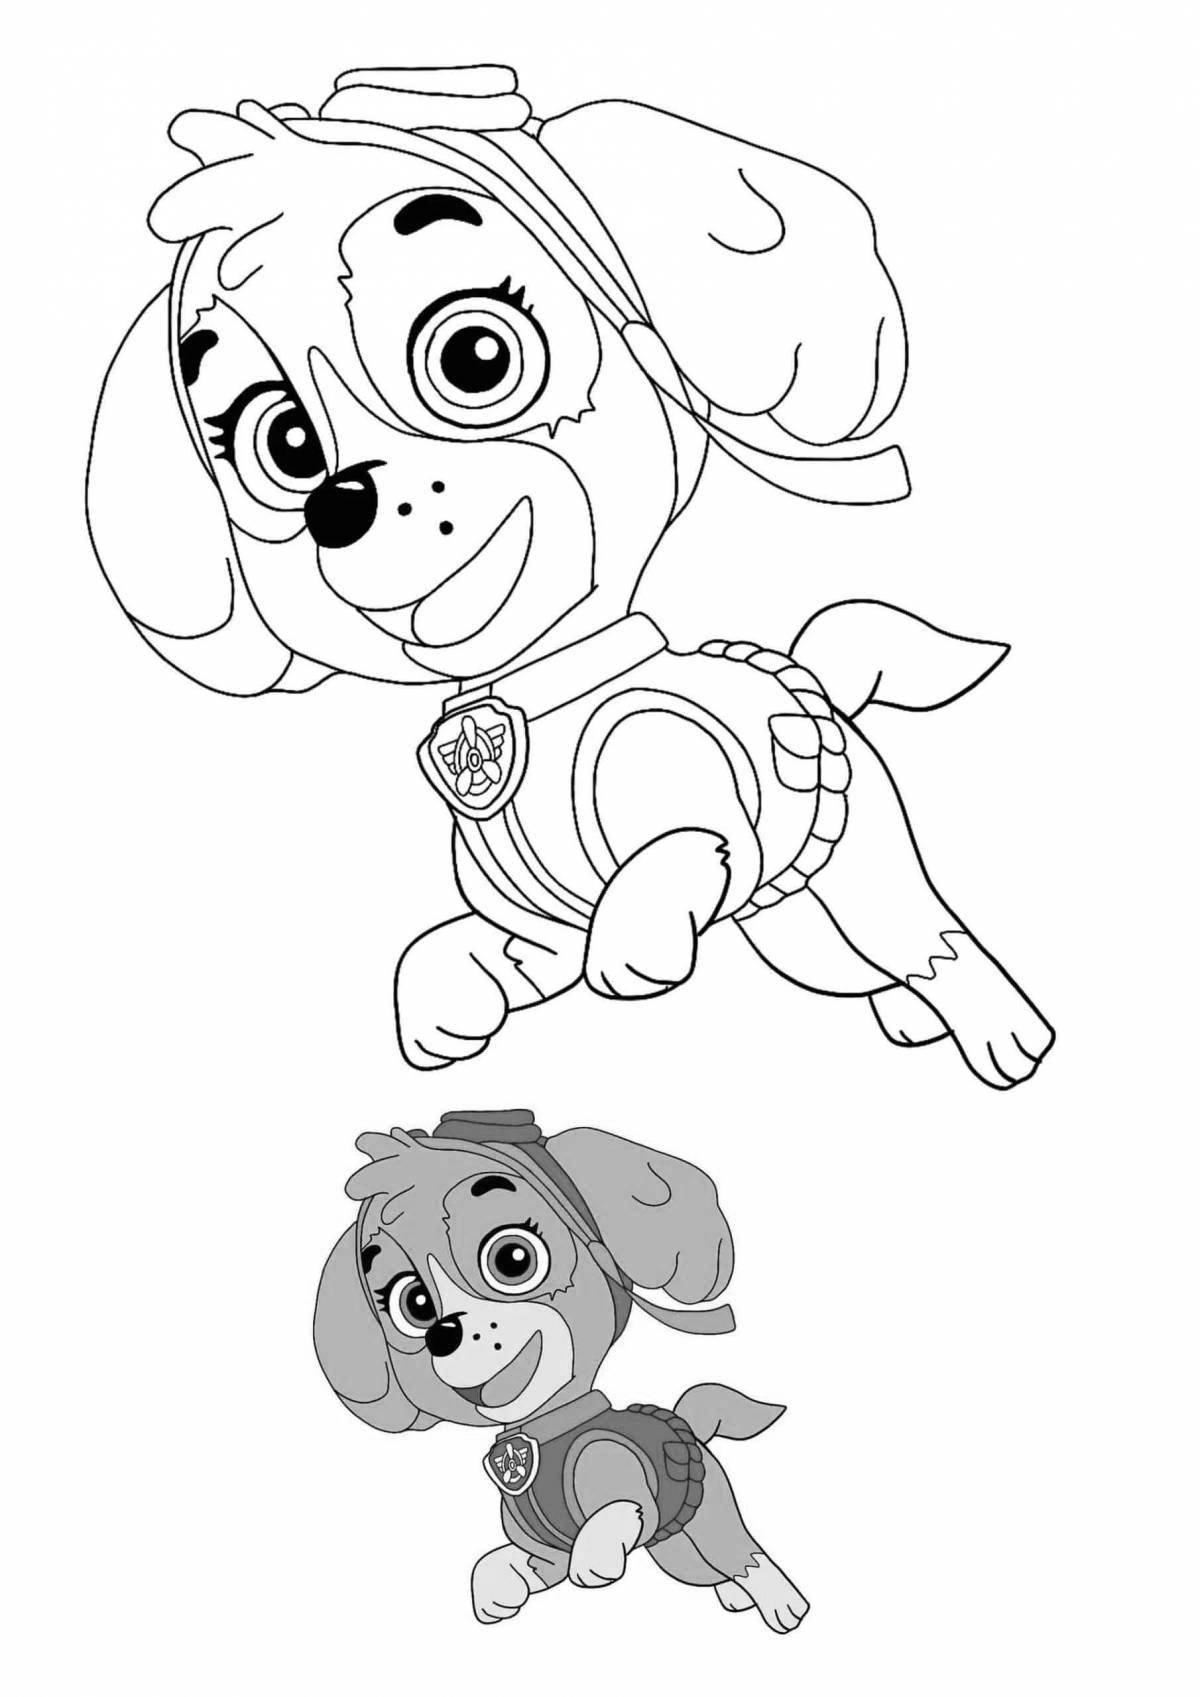 Wiggly coloring page skye puppy